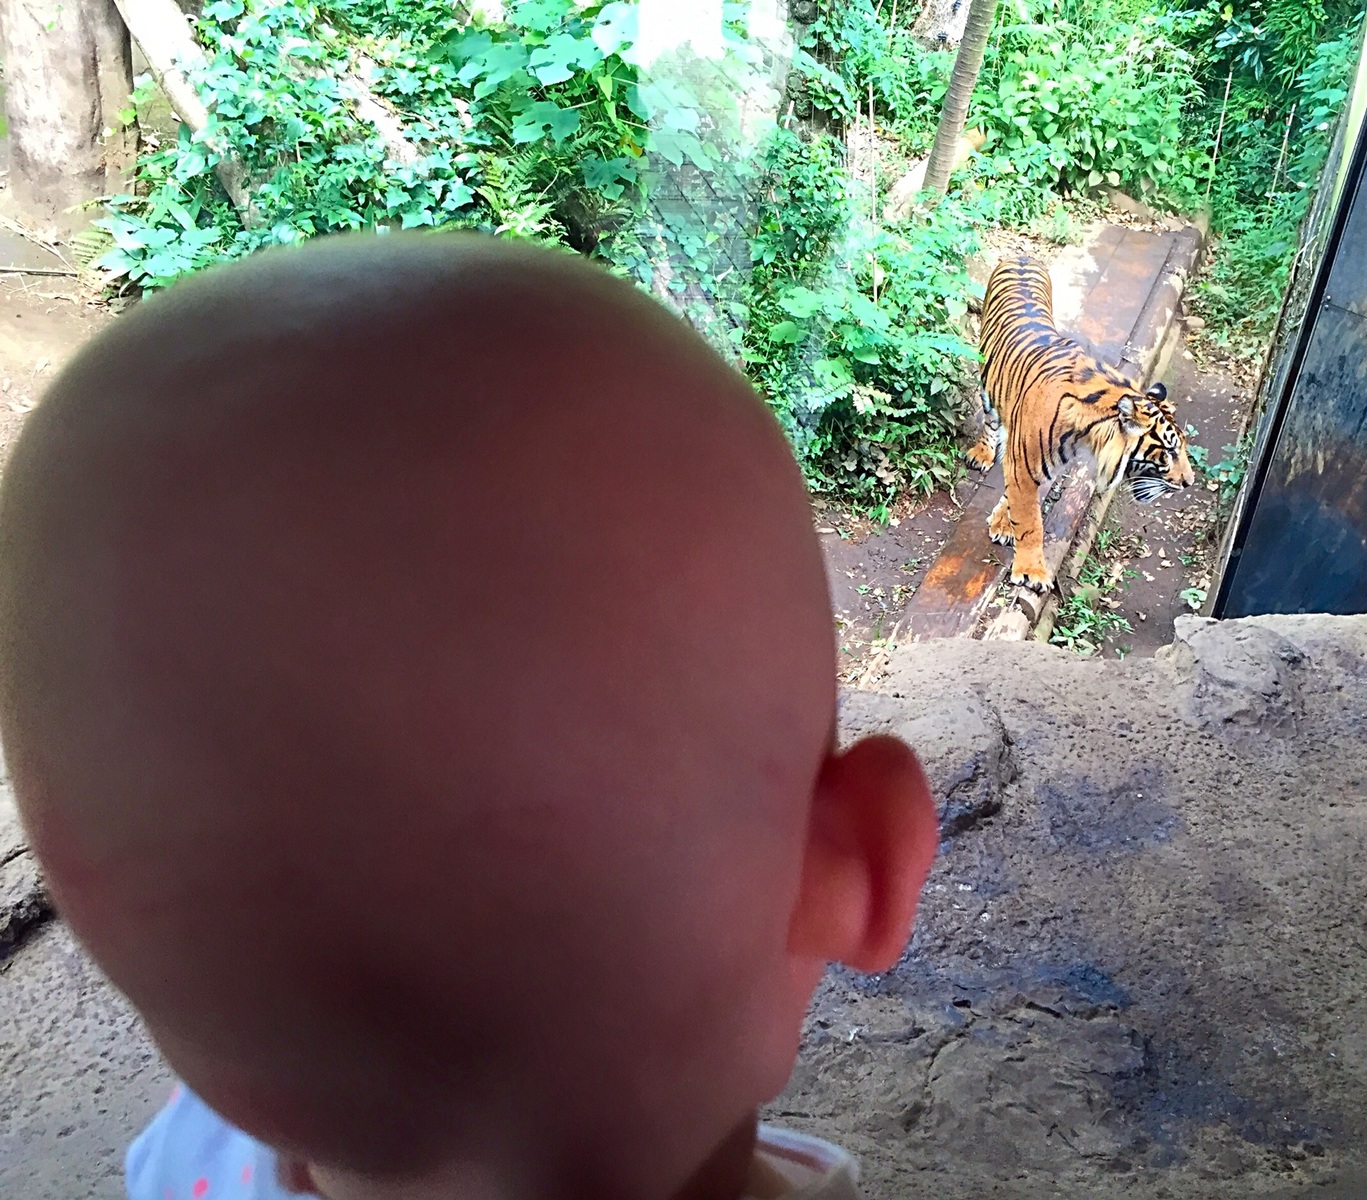 Watching a tiger